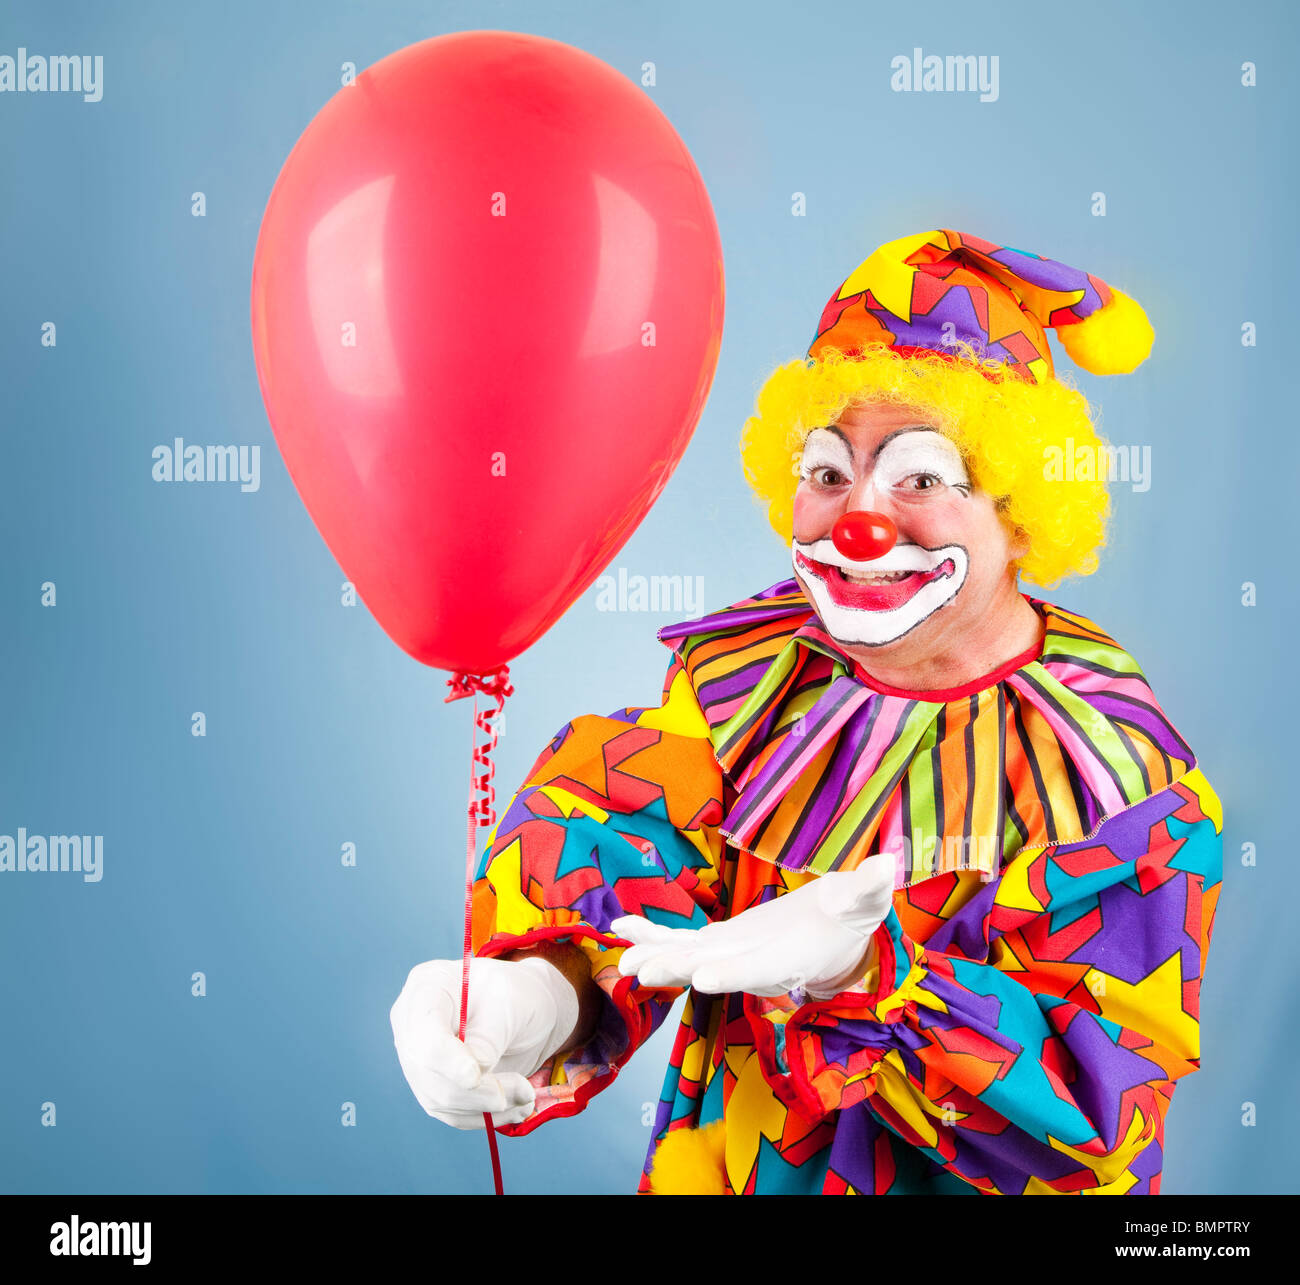 Friendly clown hands you a bright red balloon Stock Photo - Alamy